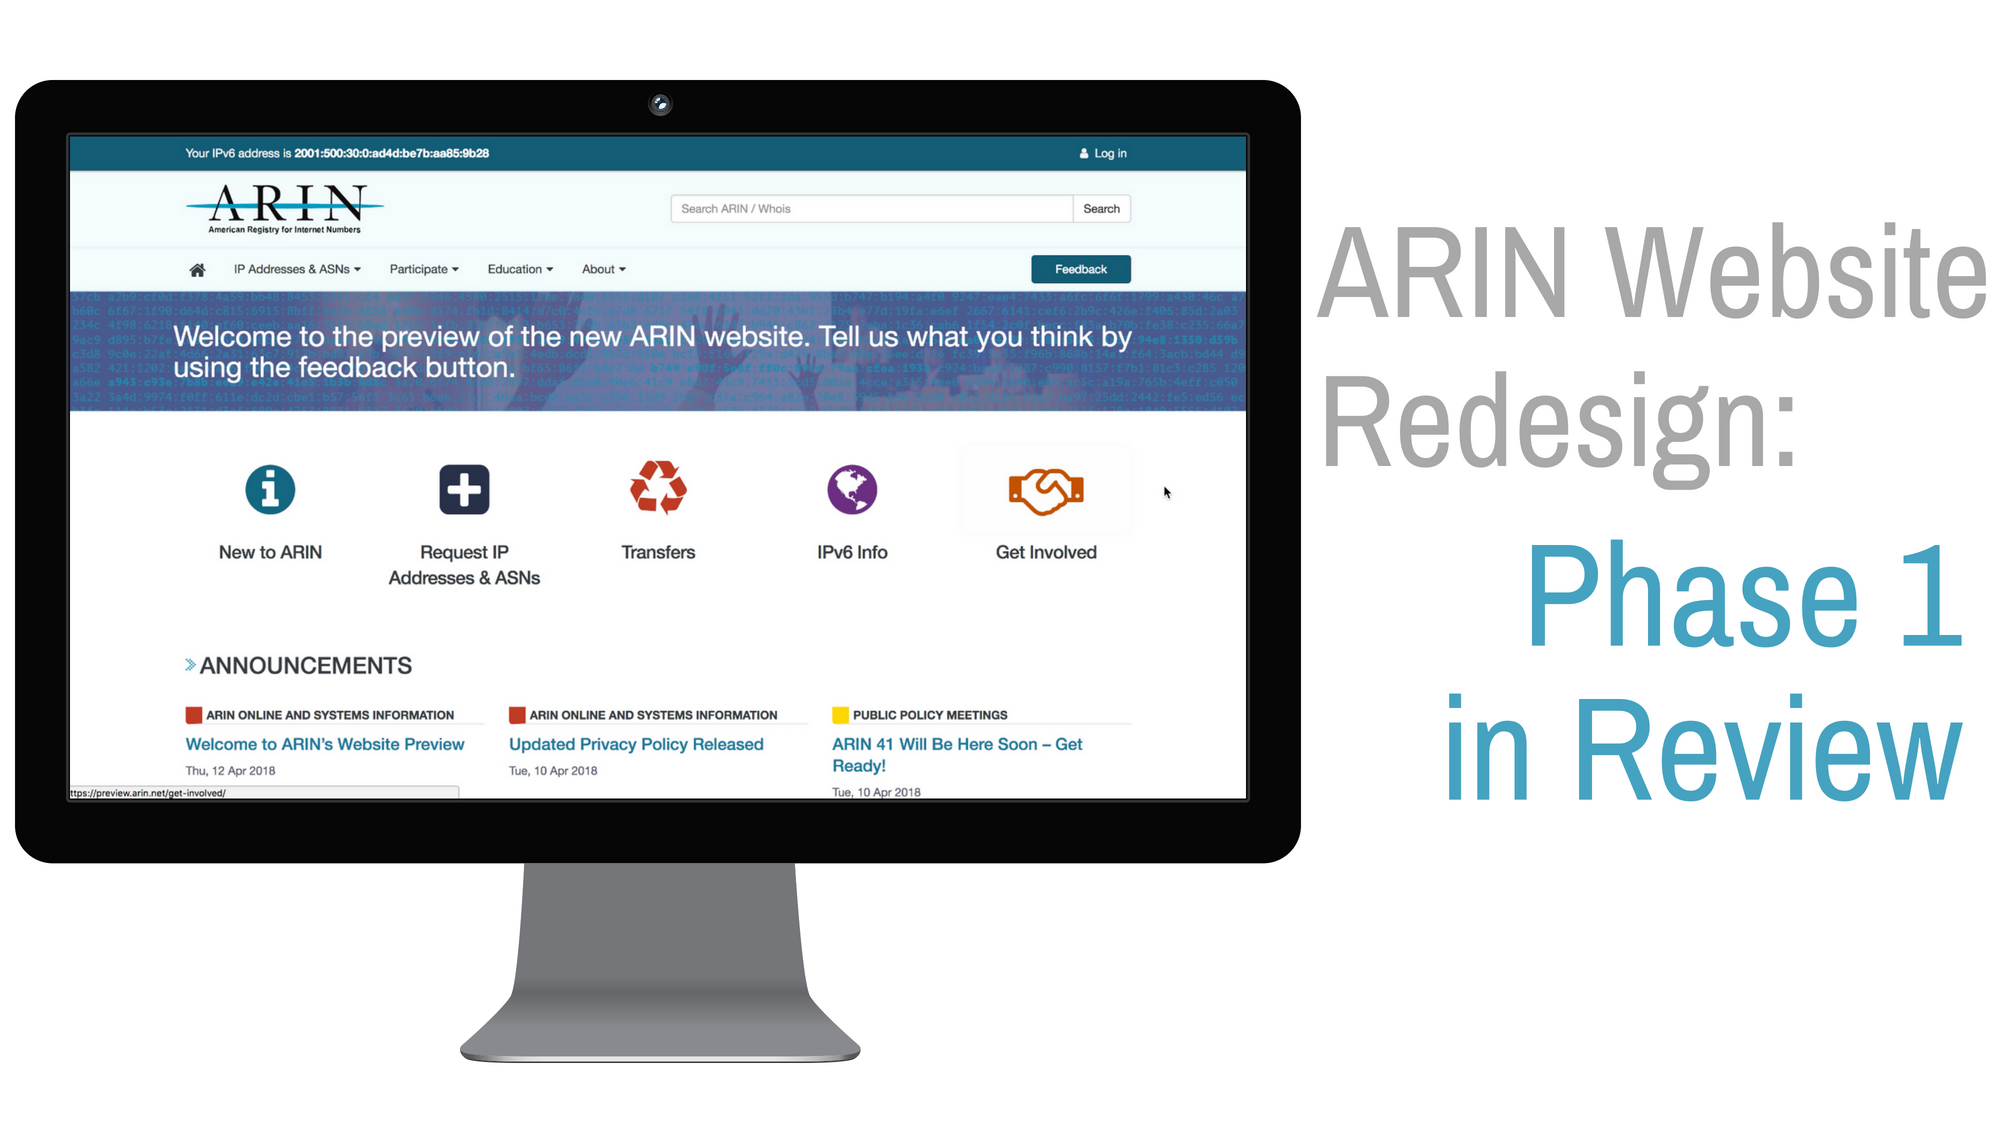 ARIN Website Redesign – Phase 1 in Review